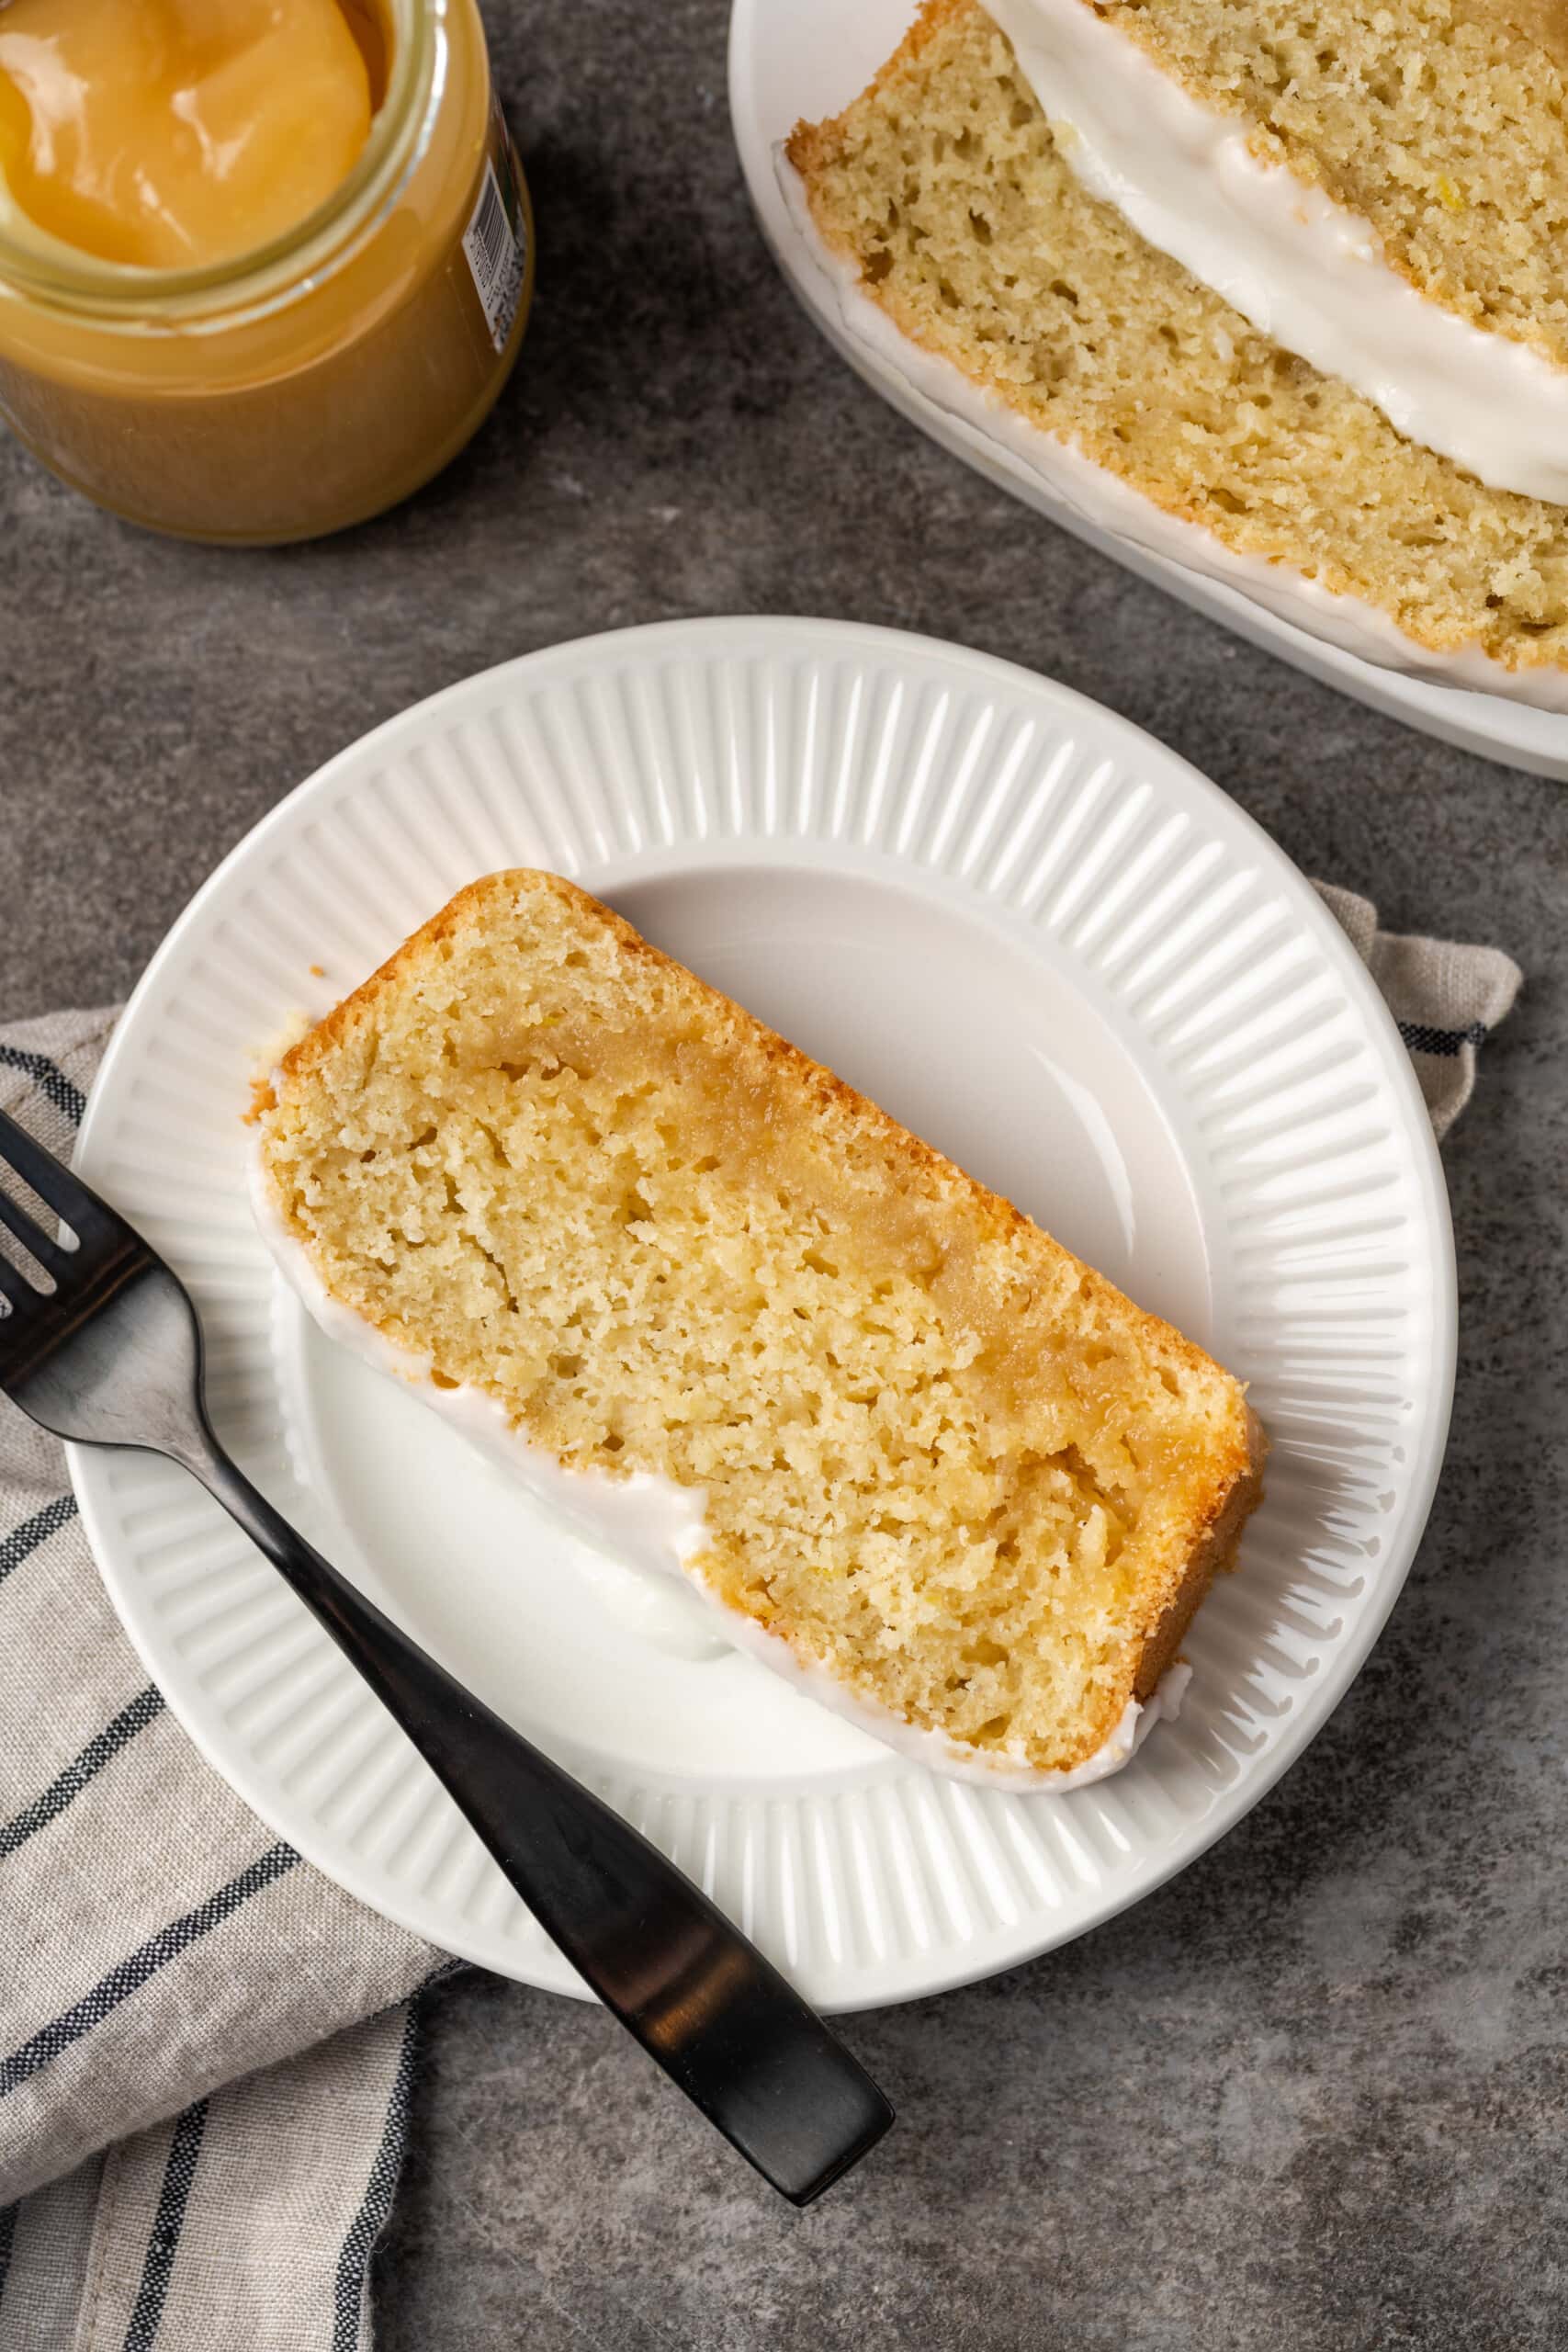 Overhead view of a slice of glazed lemon pound cake on a white plate next to a fork.